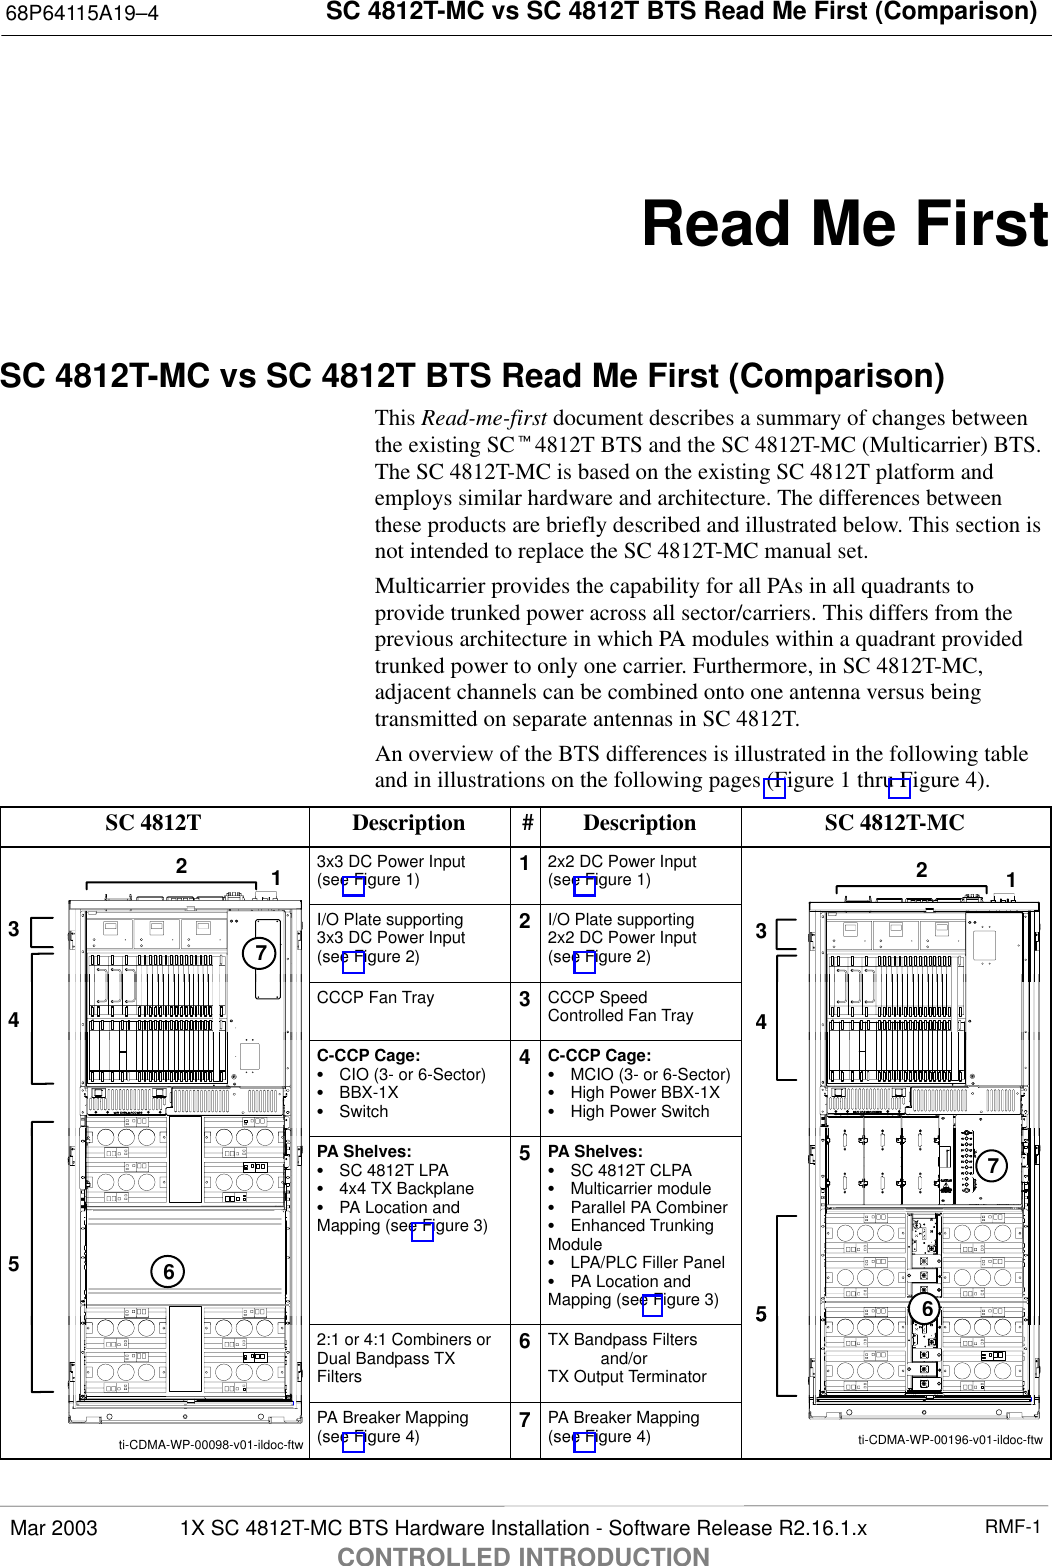 SC 4812T-MC vs SC 4812T BTS Read Me First (Comparison)68P64115A19–4Mar 2003 1X SC 4812T-MC BTS Hardware Installation - Software Release R2.16.1.xCONTROLLED INTRODUCTIONRMF-1Read Me FirstSC 4812T-MC vs SC 4812T BTS Read Me First (Comparison)This Read-me-first document describes a summary of changes betweenthe existing SCt4812T BTS and the SC 4812T-MC (Multicarrier) BTS.The SC 4812T-MC is based on the existing SC 4812T platform andemploys similar hardware and architecture. The differences betweenthese products are briefly described and illustrated below. This section isnot intended to replace the SC 4812T-MC manual set.Multicarrier provides the capability for all PAs in all quadrants toprovide trunked power across all sector/carriers. This differs from theprevious architecture in which PA modules within a quadrant providedtrunked power to only one carrier. Furthermore, in SC 4812T-MC,adjacent channels can be combined onto one antenna versus beingtransmitted on separate antennas in SC 4812T.An overview of the BTS differences is illustrated in the following tableand in illustrations on the following pages (Figure 1 thru Figure 4).SC 4812T Description # Description SC 4812T-MC123x3 DC Power Input(see Figure 1) 12x2 DC Power Input(see Figure 1) 1273I/O Plate supporting 3x3 DC Power Input(see Figure 2)2I/O Plate supporting 2x2 DC Power Input(see Figure 2)34CCCP Fan Tray 3CCCP Speed Controlled Fan Tray 4C-CCP Cage:SCIO (3- or 6-Sector)SBBX-1XSSwitch4C-CCP Cage:SMCIO (3- or 6-Sector)SHigh Power BBX-1XSHigh Power Switch65PA Shelves:SSC 4812T LPAS4x4 TX BackplaneSPA Location andMapping (see Figure 3)5PA Shelves:SSC 4812T CLPASMulticarrier moduleSParallel PA CombinerSEnhanced TrunkingModuleSLPA/PLC Filler PanelSPA Location andMapping (see Figure 3) 5672:1 or 4:1 Combiners orDual Bandpass TXFilters6TX Bandpass Filtersand/orTX Output Terminator5ti-CDMA-WP-00098-v01-ildoc-ftwPA Breaker Mapping(see Figure 4) 7PA Breaker Mapping(see Figure 4) ti-CDMA-WP-00196-v01-ildoc-ftw 